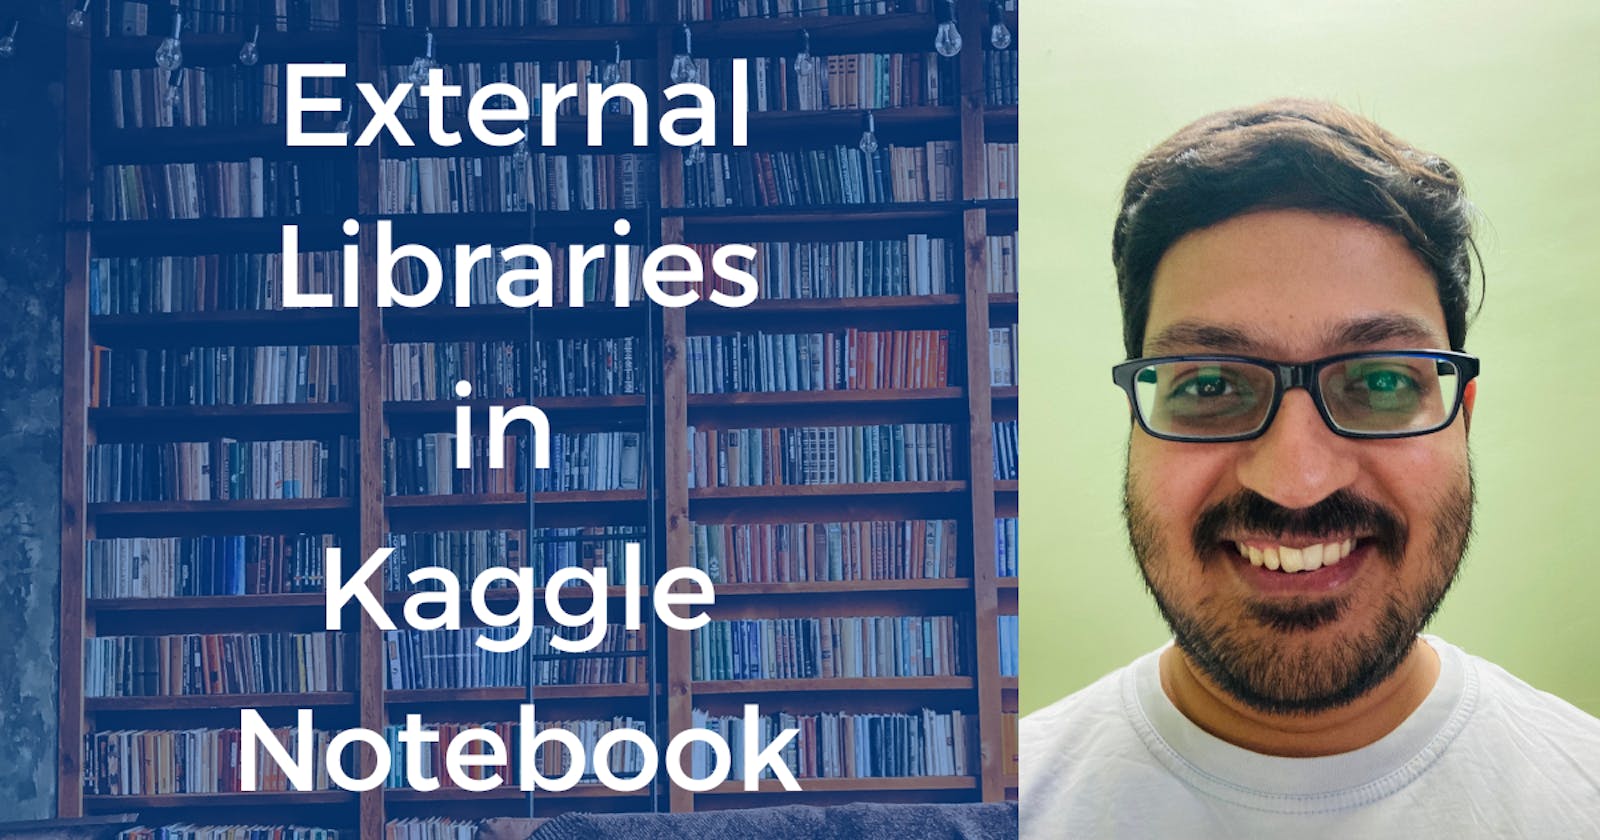 Adding external libraries to Kaggle Notebook